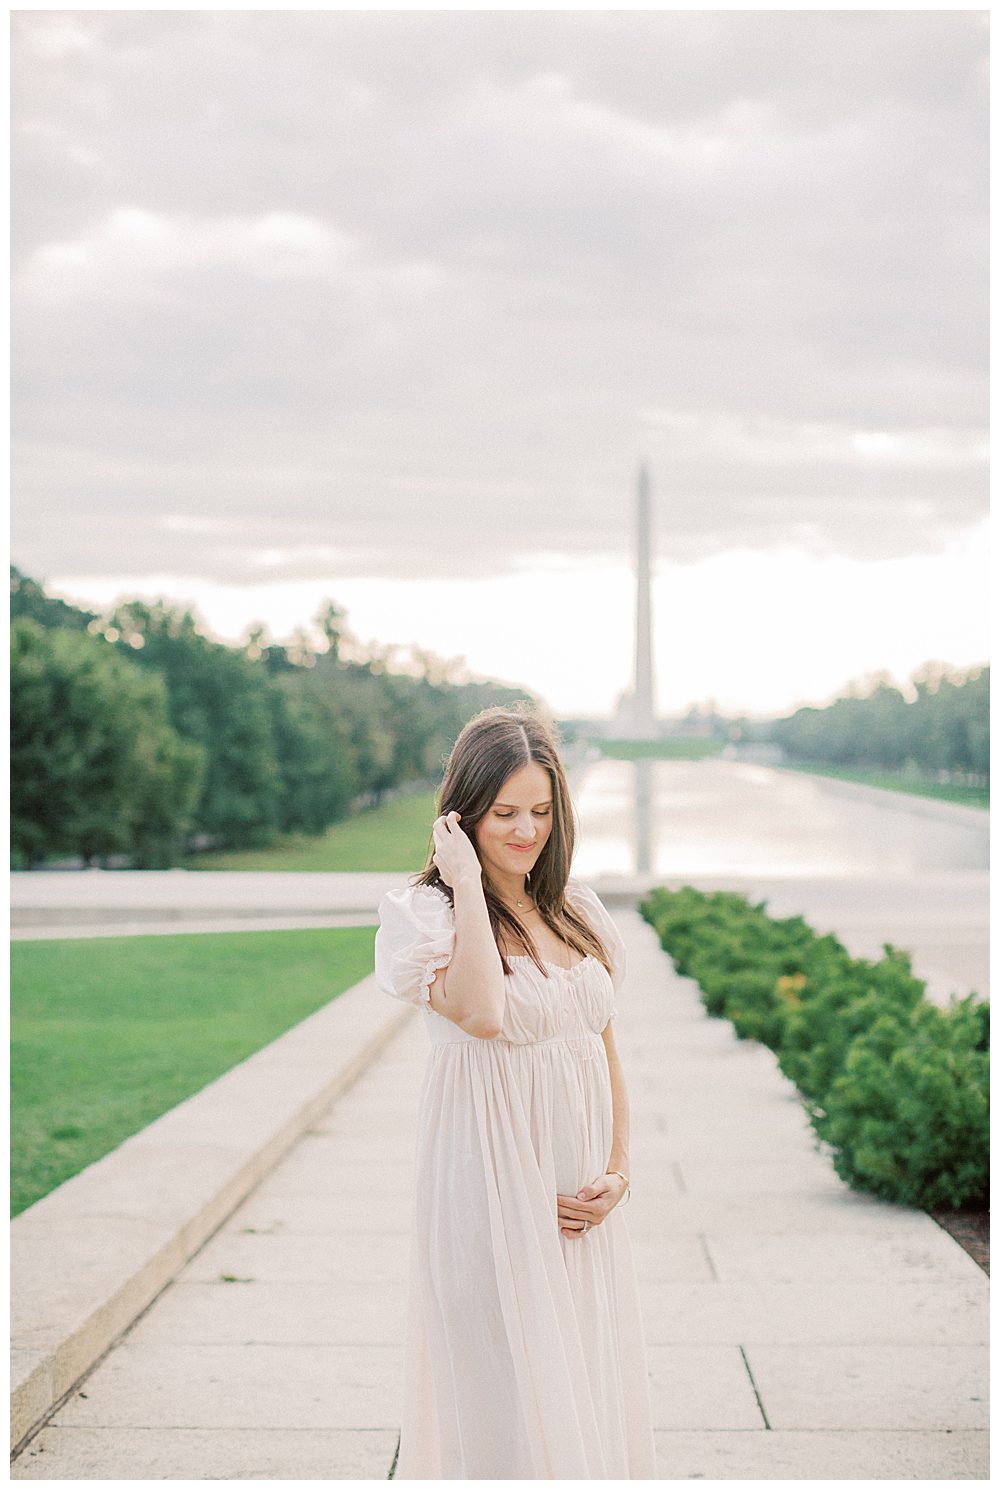 When to have your maternity session